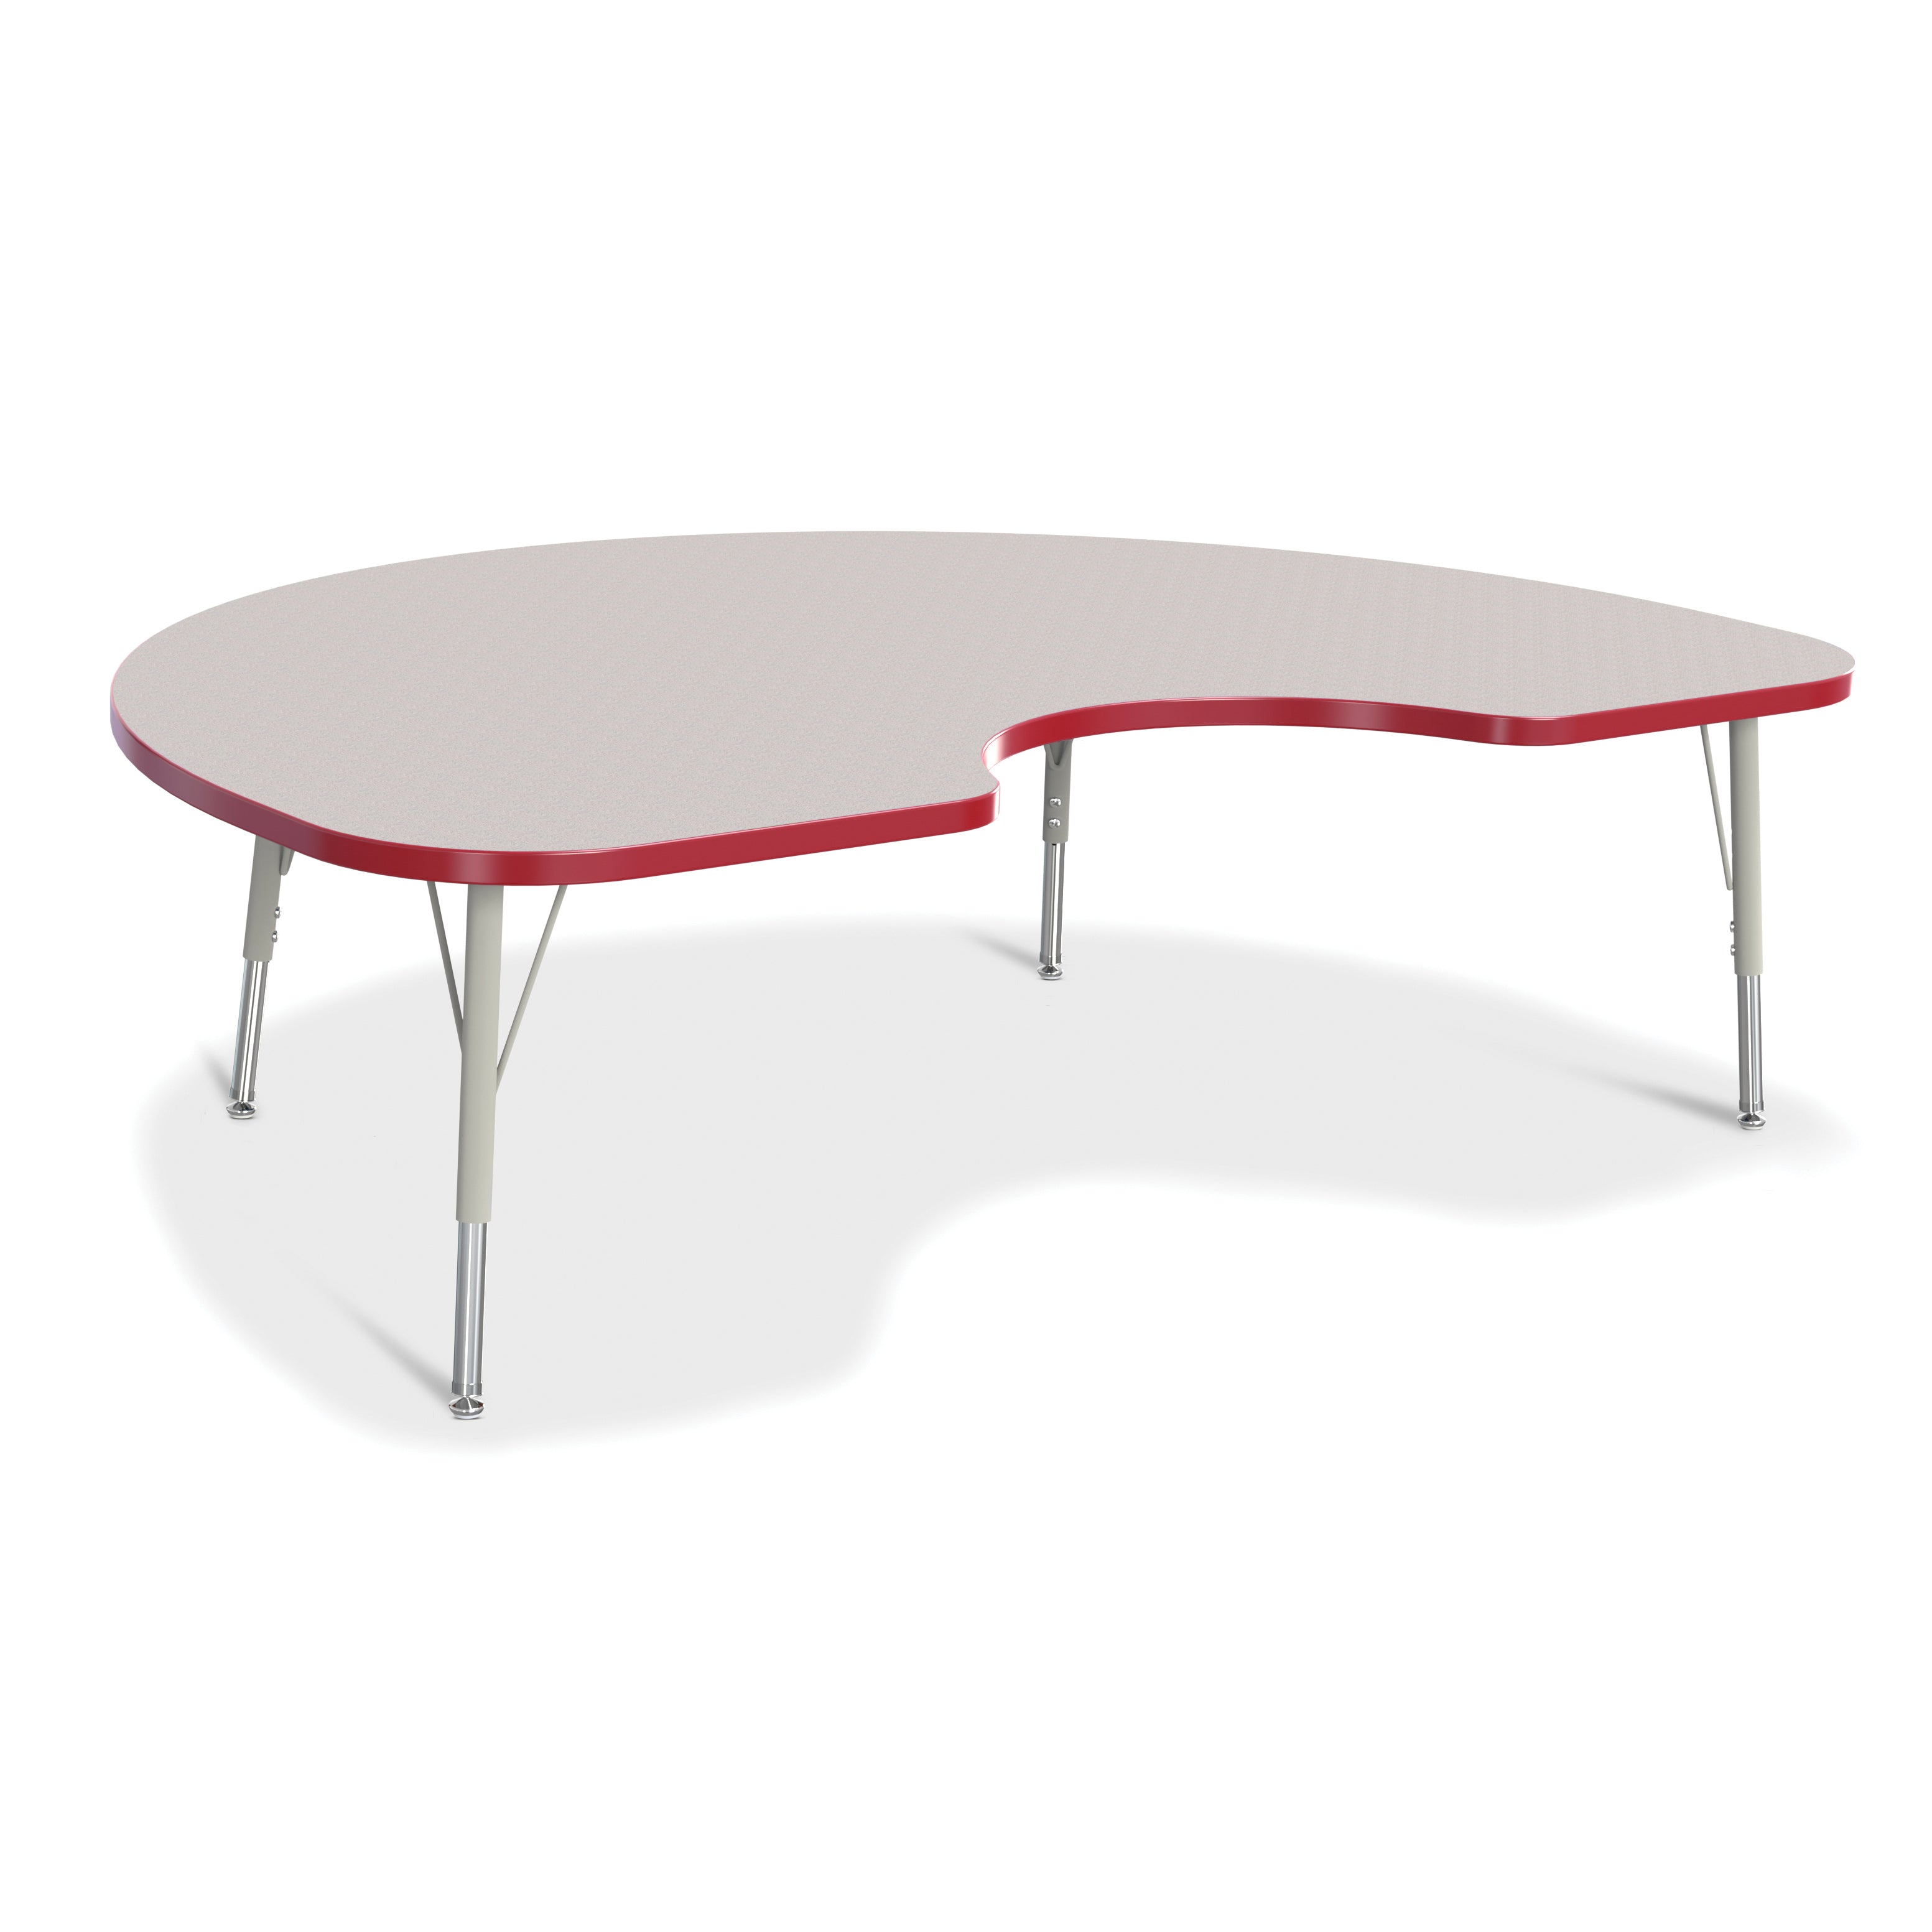 6423JCE008, Berries Kidney Activity Table - 48" X 72", E-height - Freckled Gray/Red/Gray